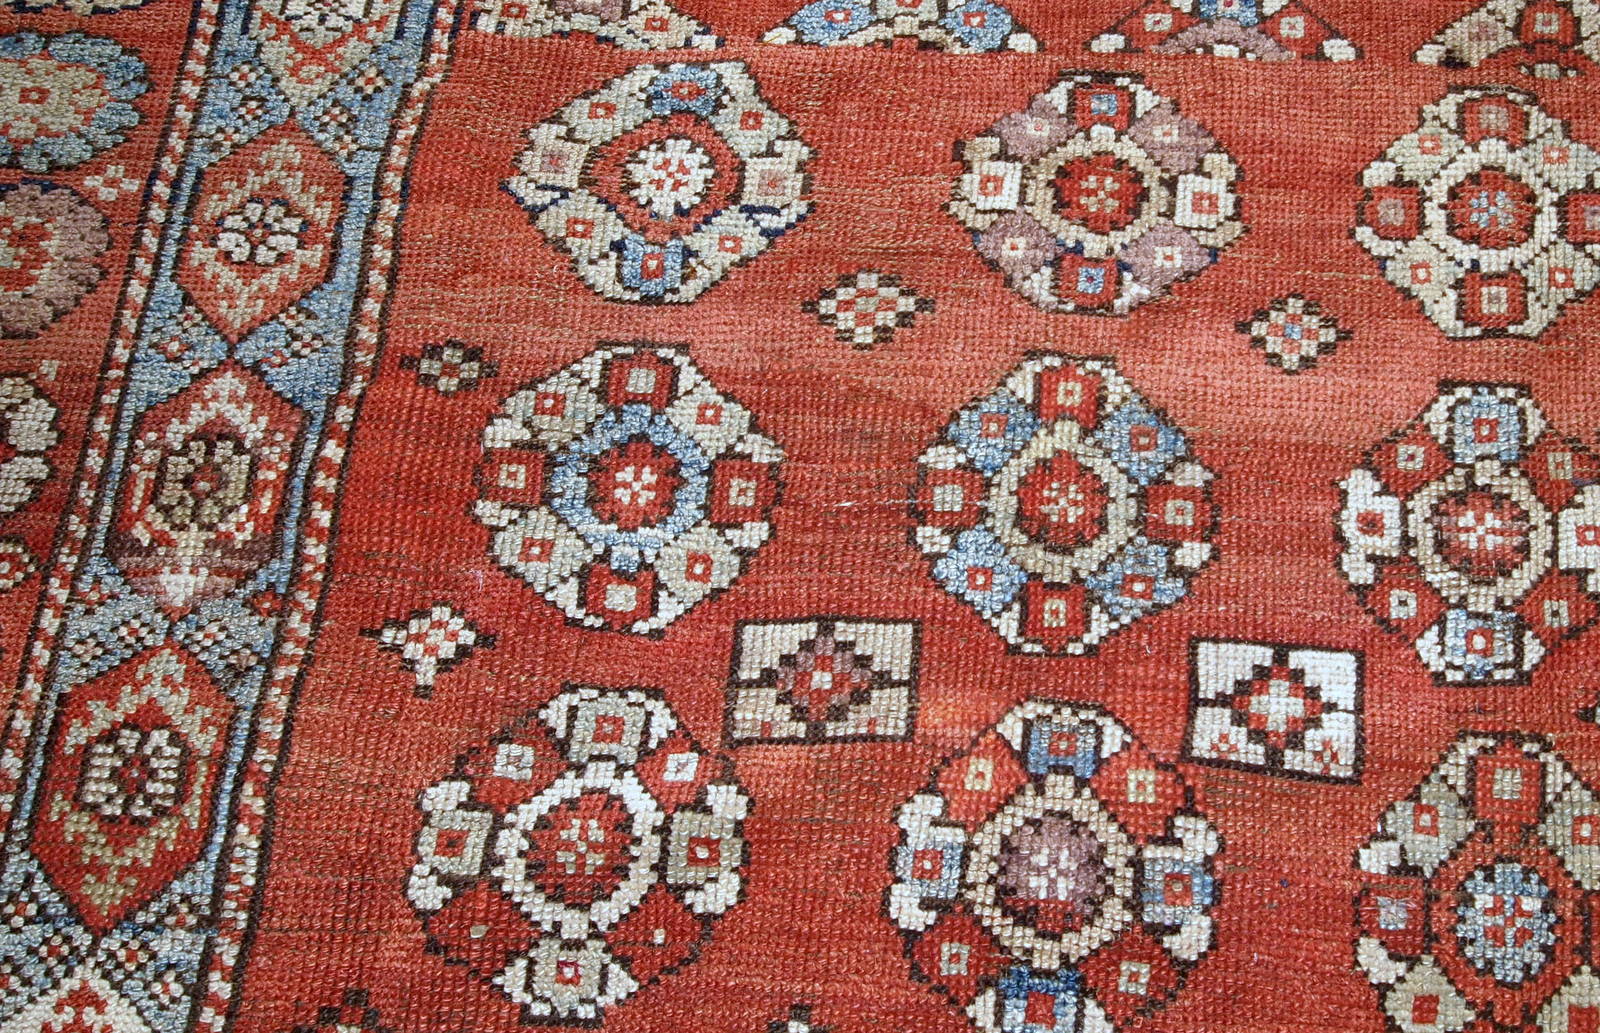 Handmade antique Turkish Melas rug in red, sky blue and beige shades. The rug is from the end of 19th century in original good condition.